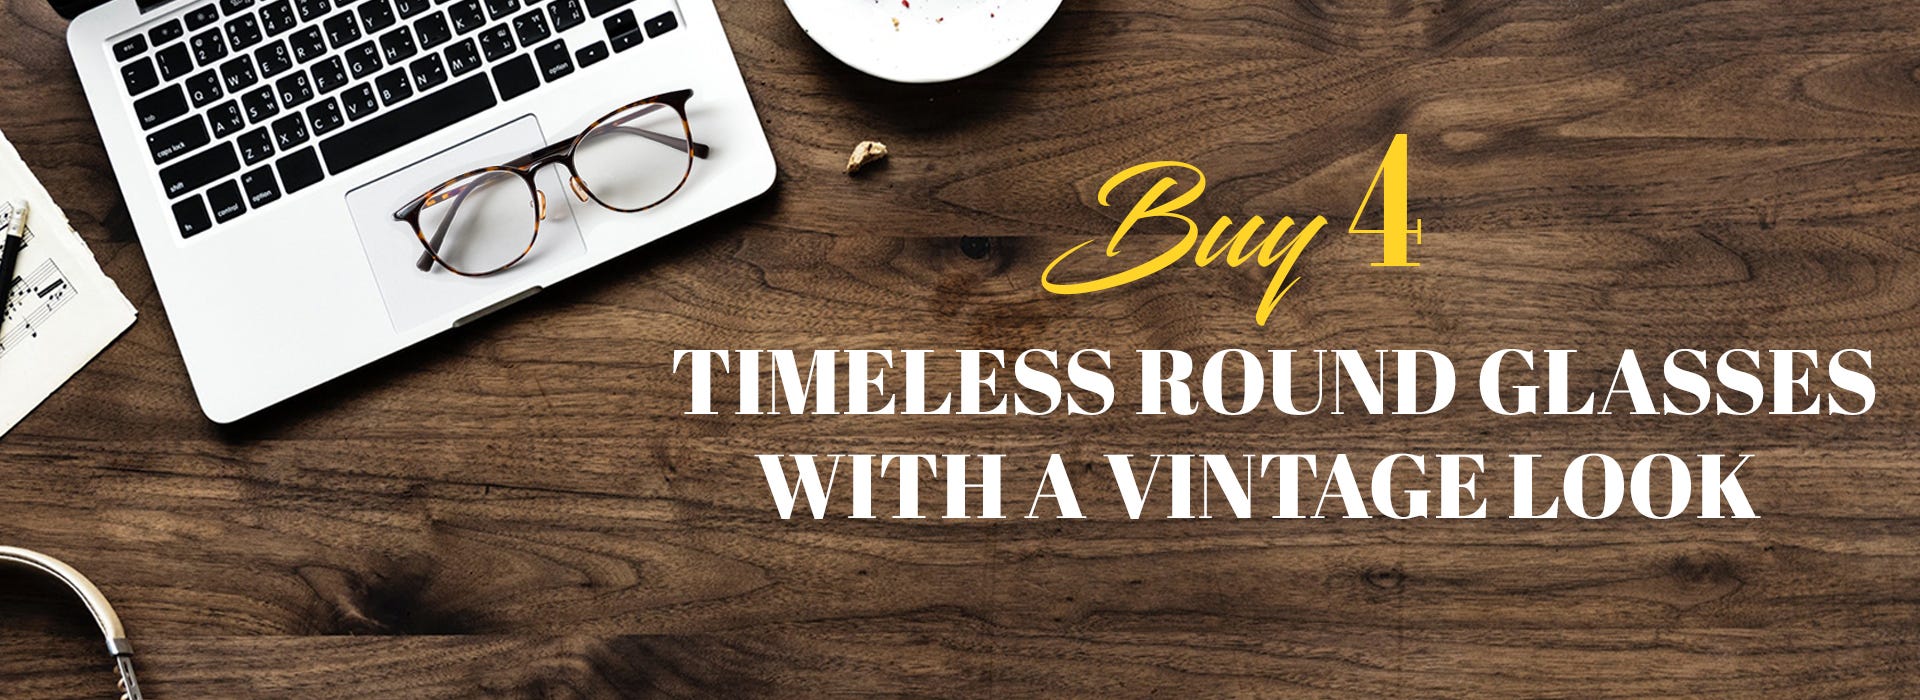 Buy 4 Timeless Round Glasses With A Vintage Look